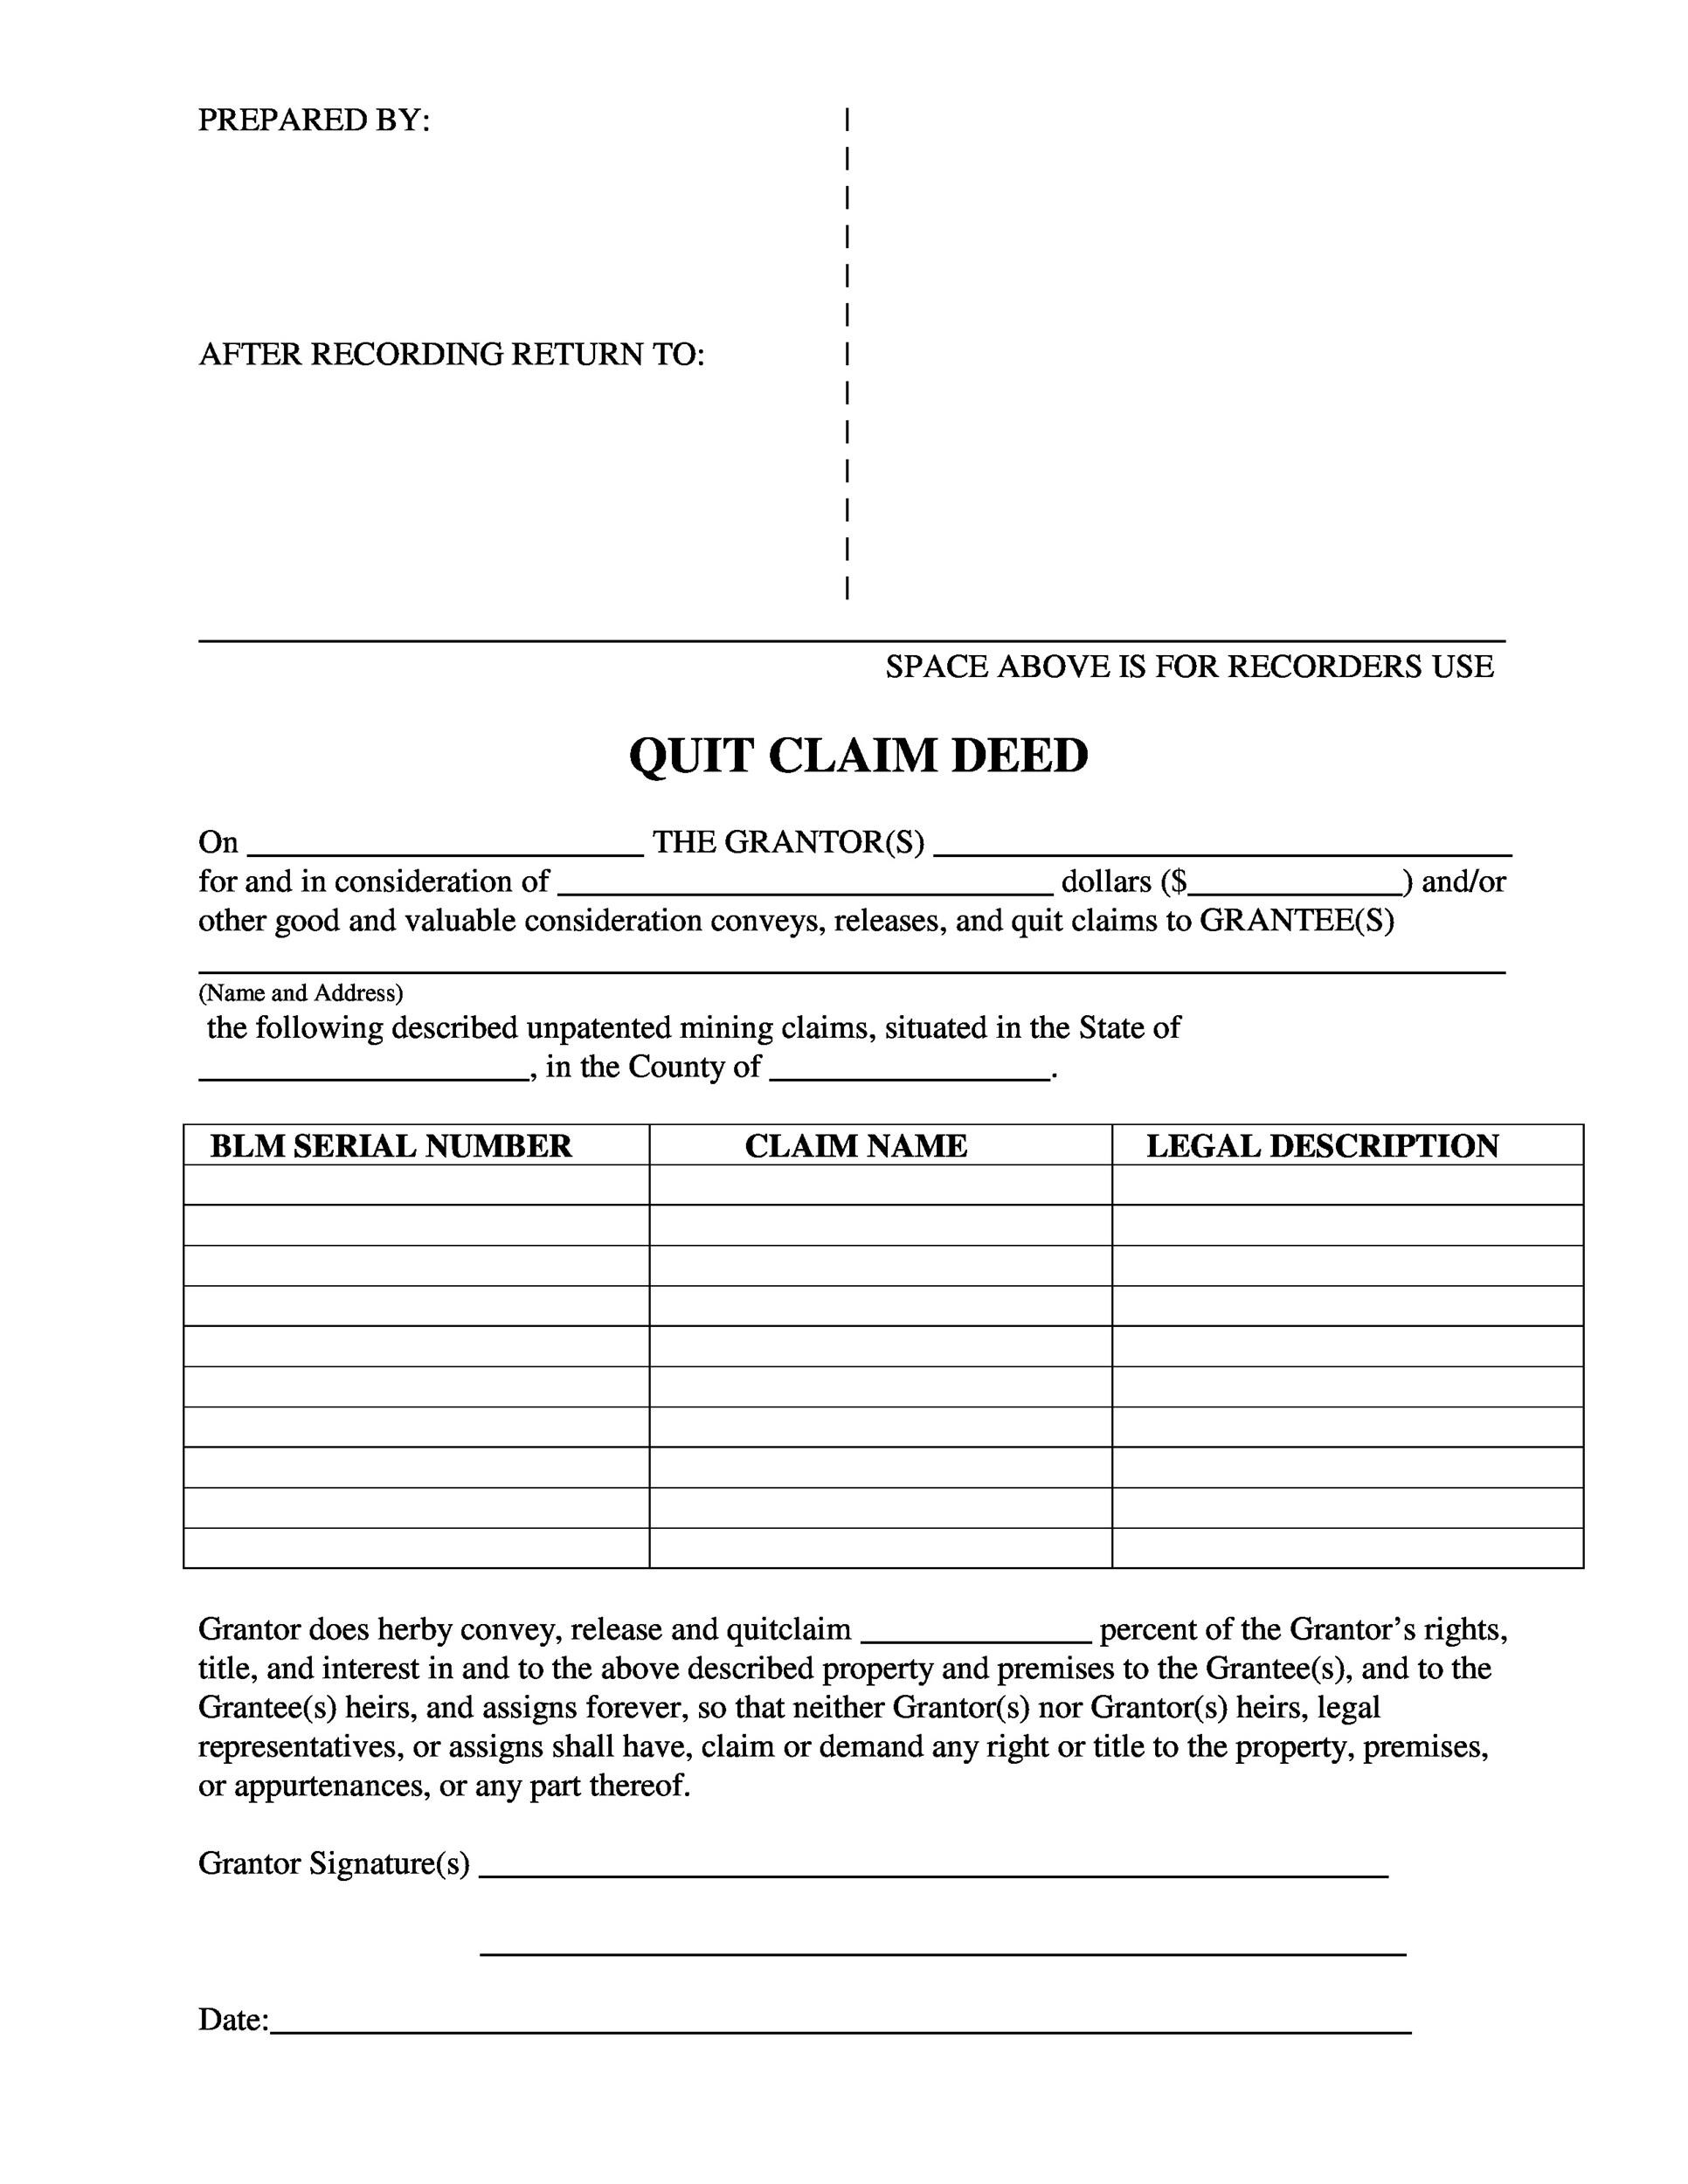 Free Quit Claim Deed Forms Templates Templatelab